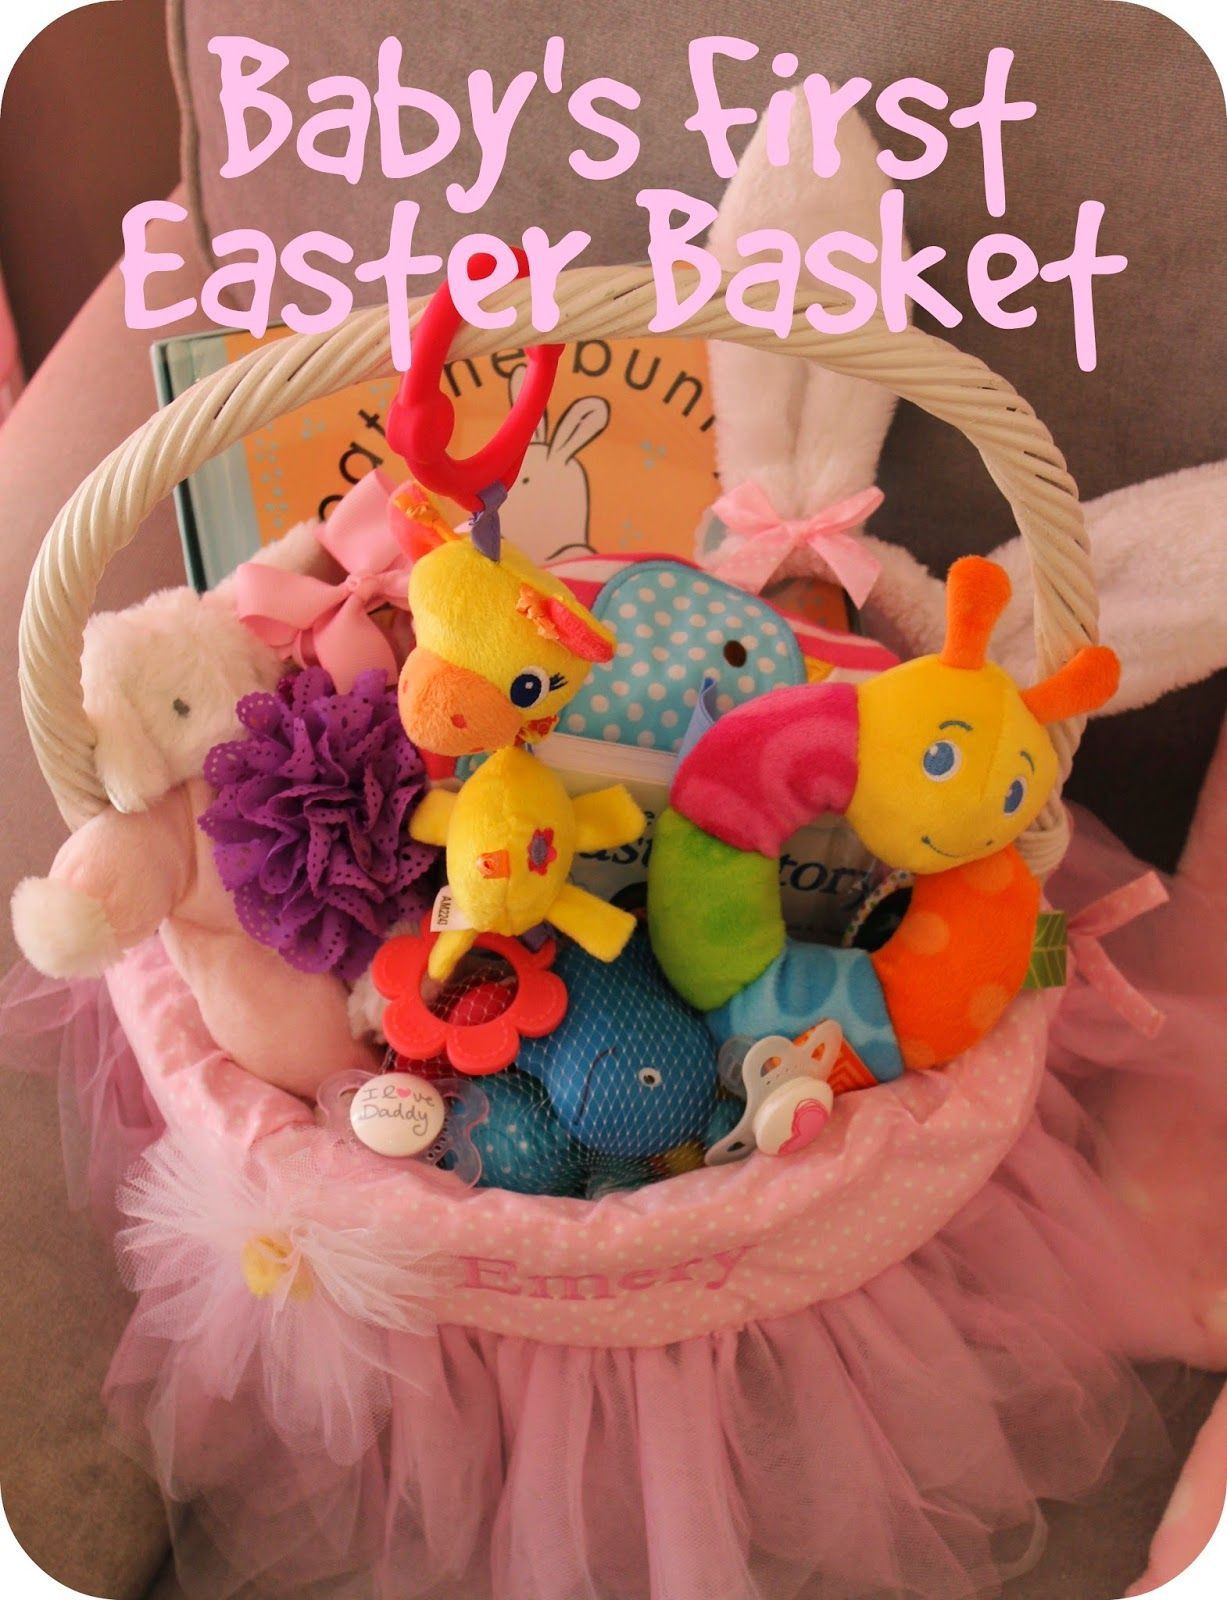 Baby Easter Baskets Ideas
 baby s first easter basket ideas for a newborn